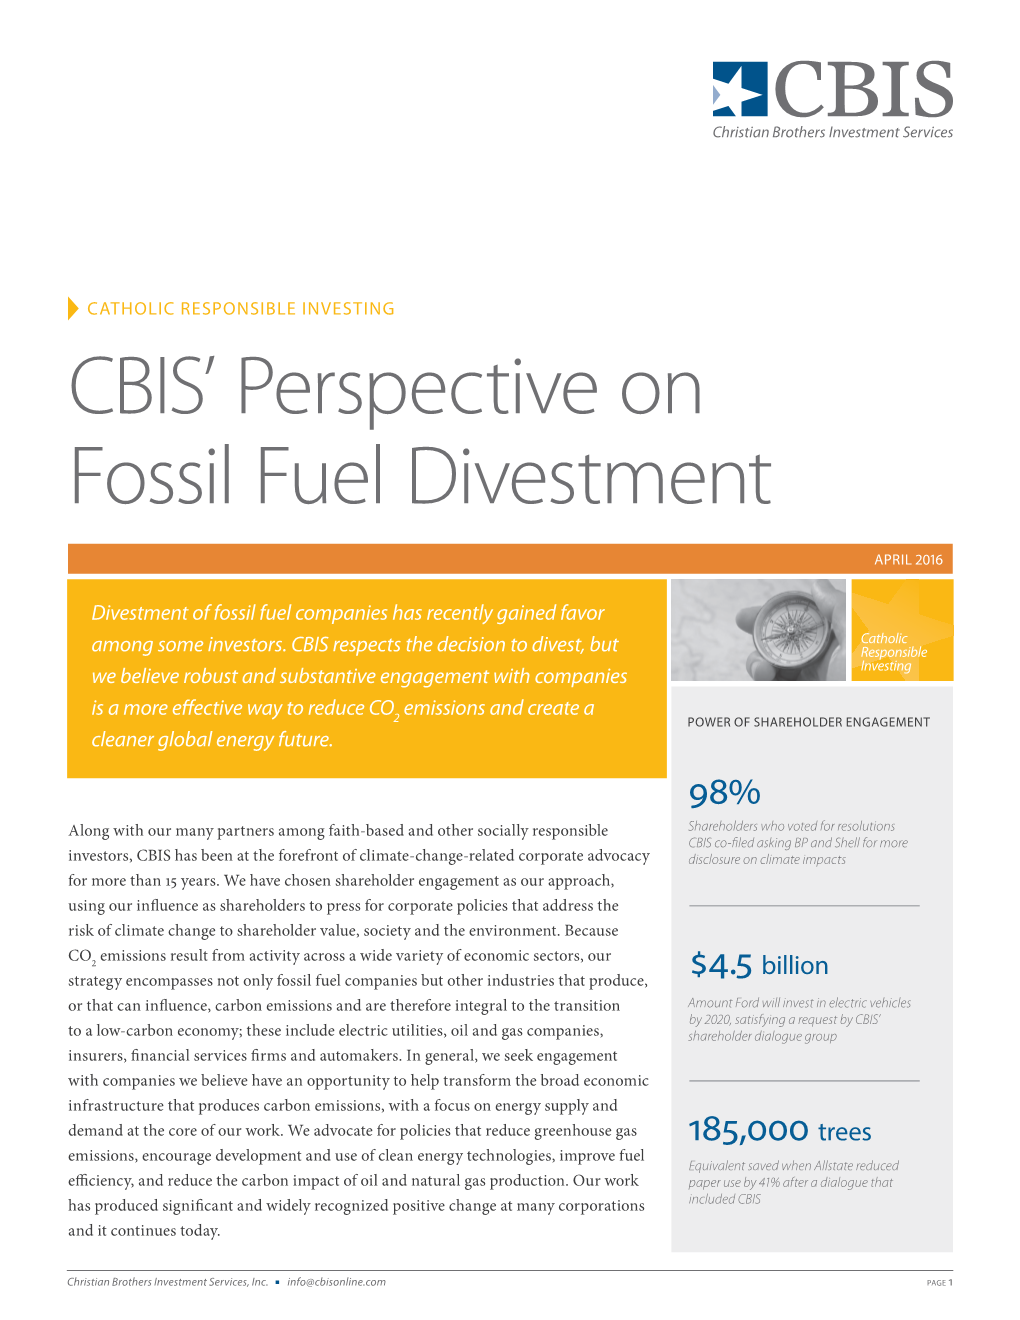 CBIS' Perspective on Fossil Fuel Divestment